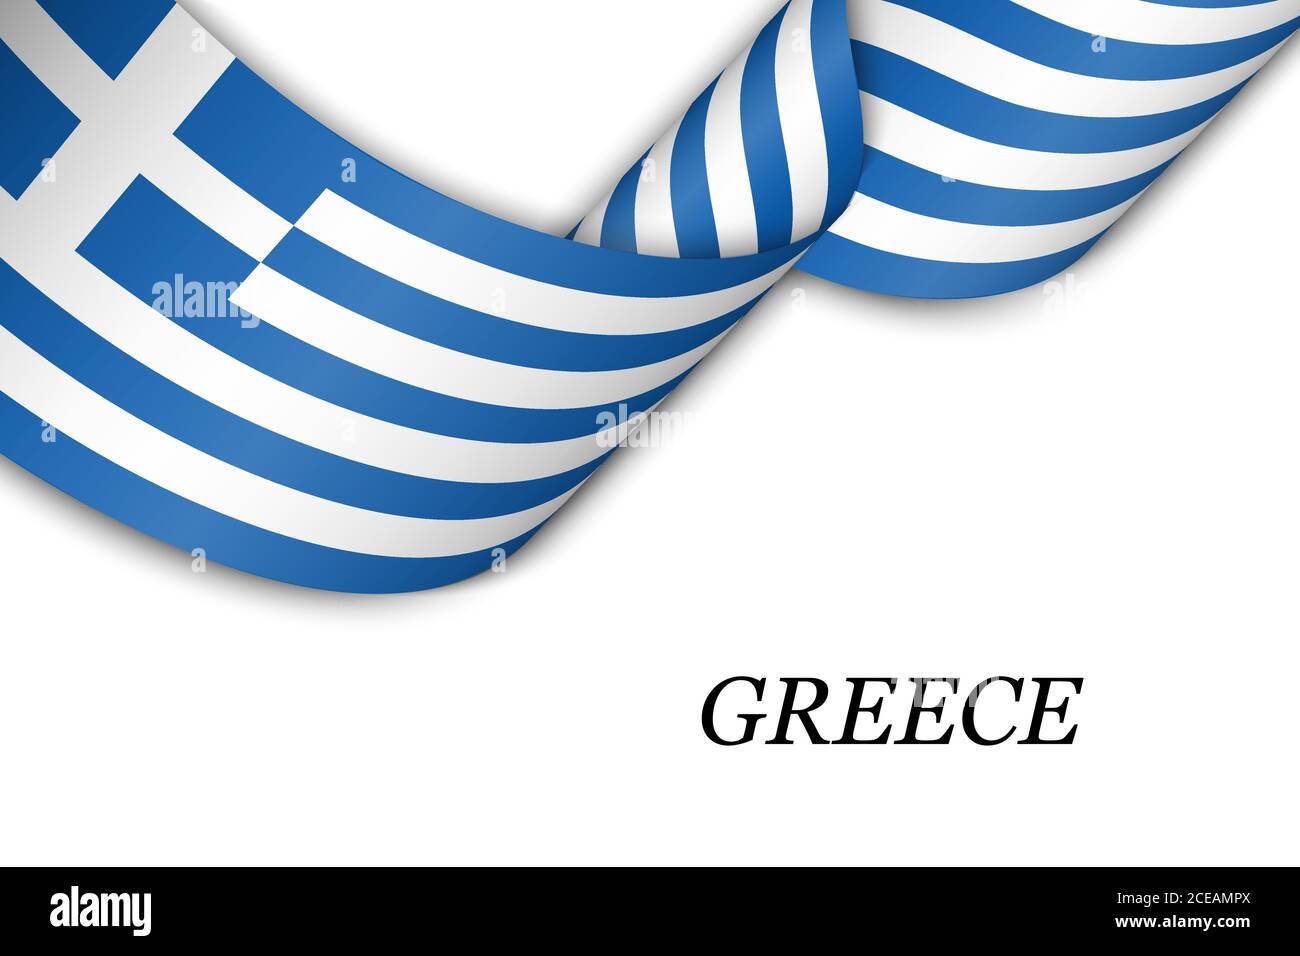 Waving ribbon or banner with flag of Greece Stock Vector